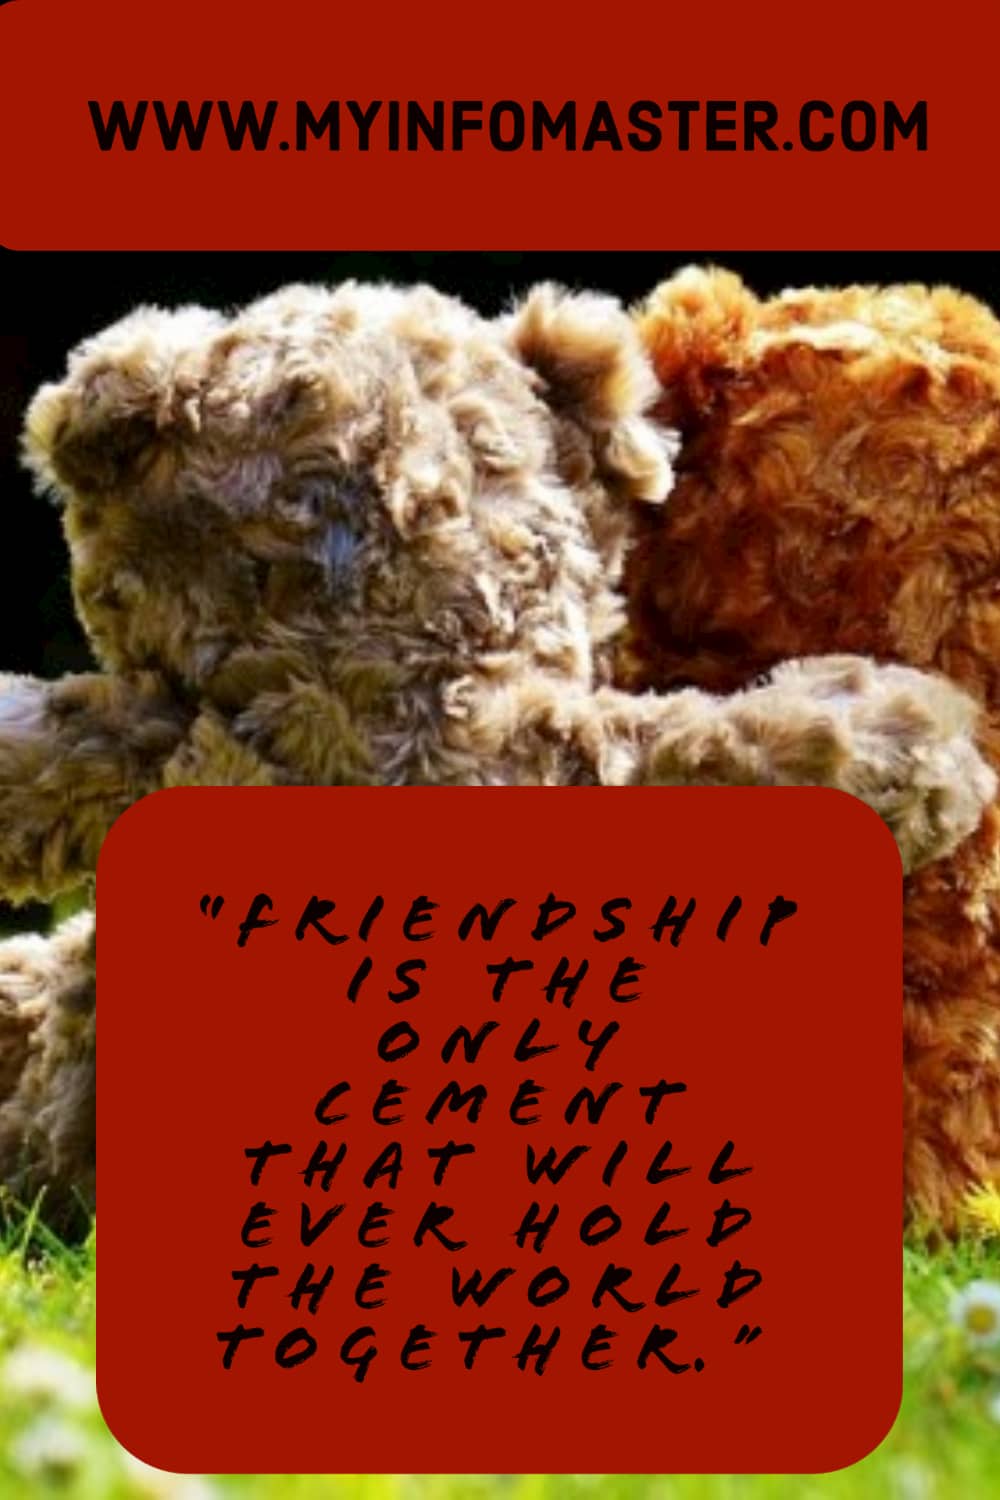 friendship quotes, best friend quotes, friendship day quotes, fake friends quotes, bff quotes, funny friendship quotes, true friendship quotes, best friend status, short friendship quotes, short best friend quotes, friendship quotes in hindi, good friends quotes, friendship quotes in English, good morning quotes for friends, real friends quotes, best friends forever quotes, friendship quotes and sayings, old friends quotes